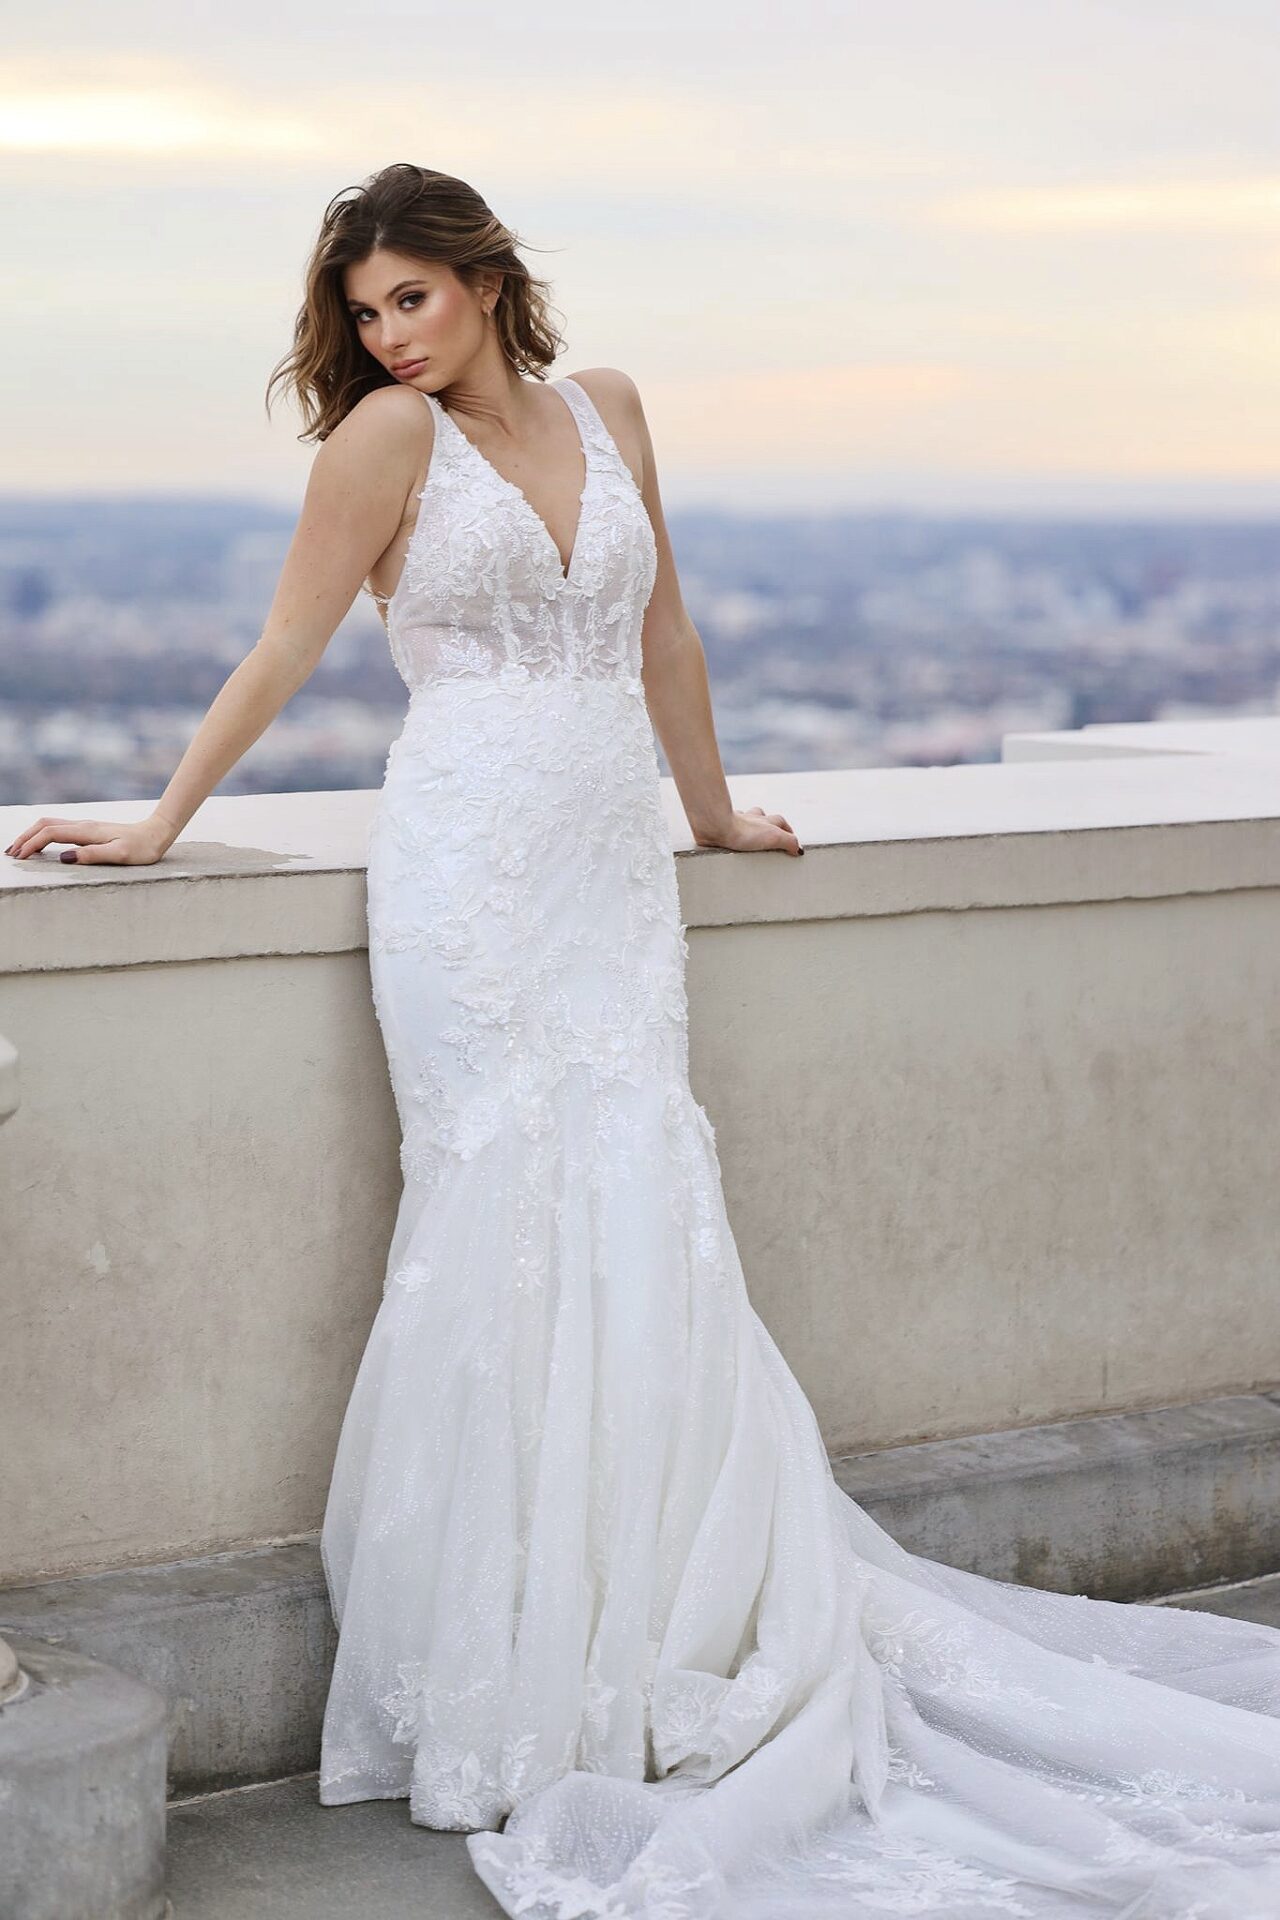 Simple Lace Fit And Flare Wedding Dress With Sheer Back